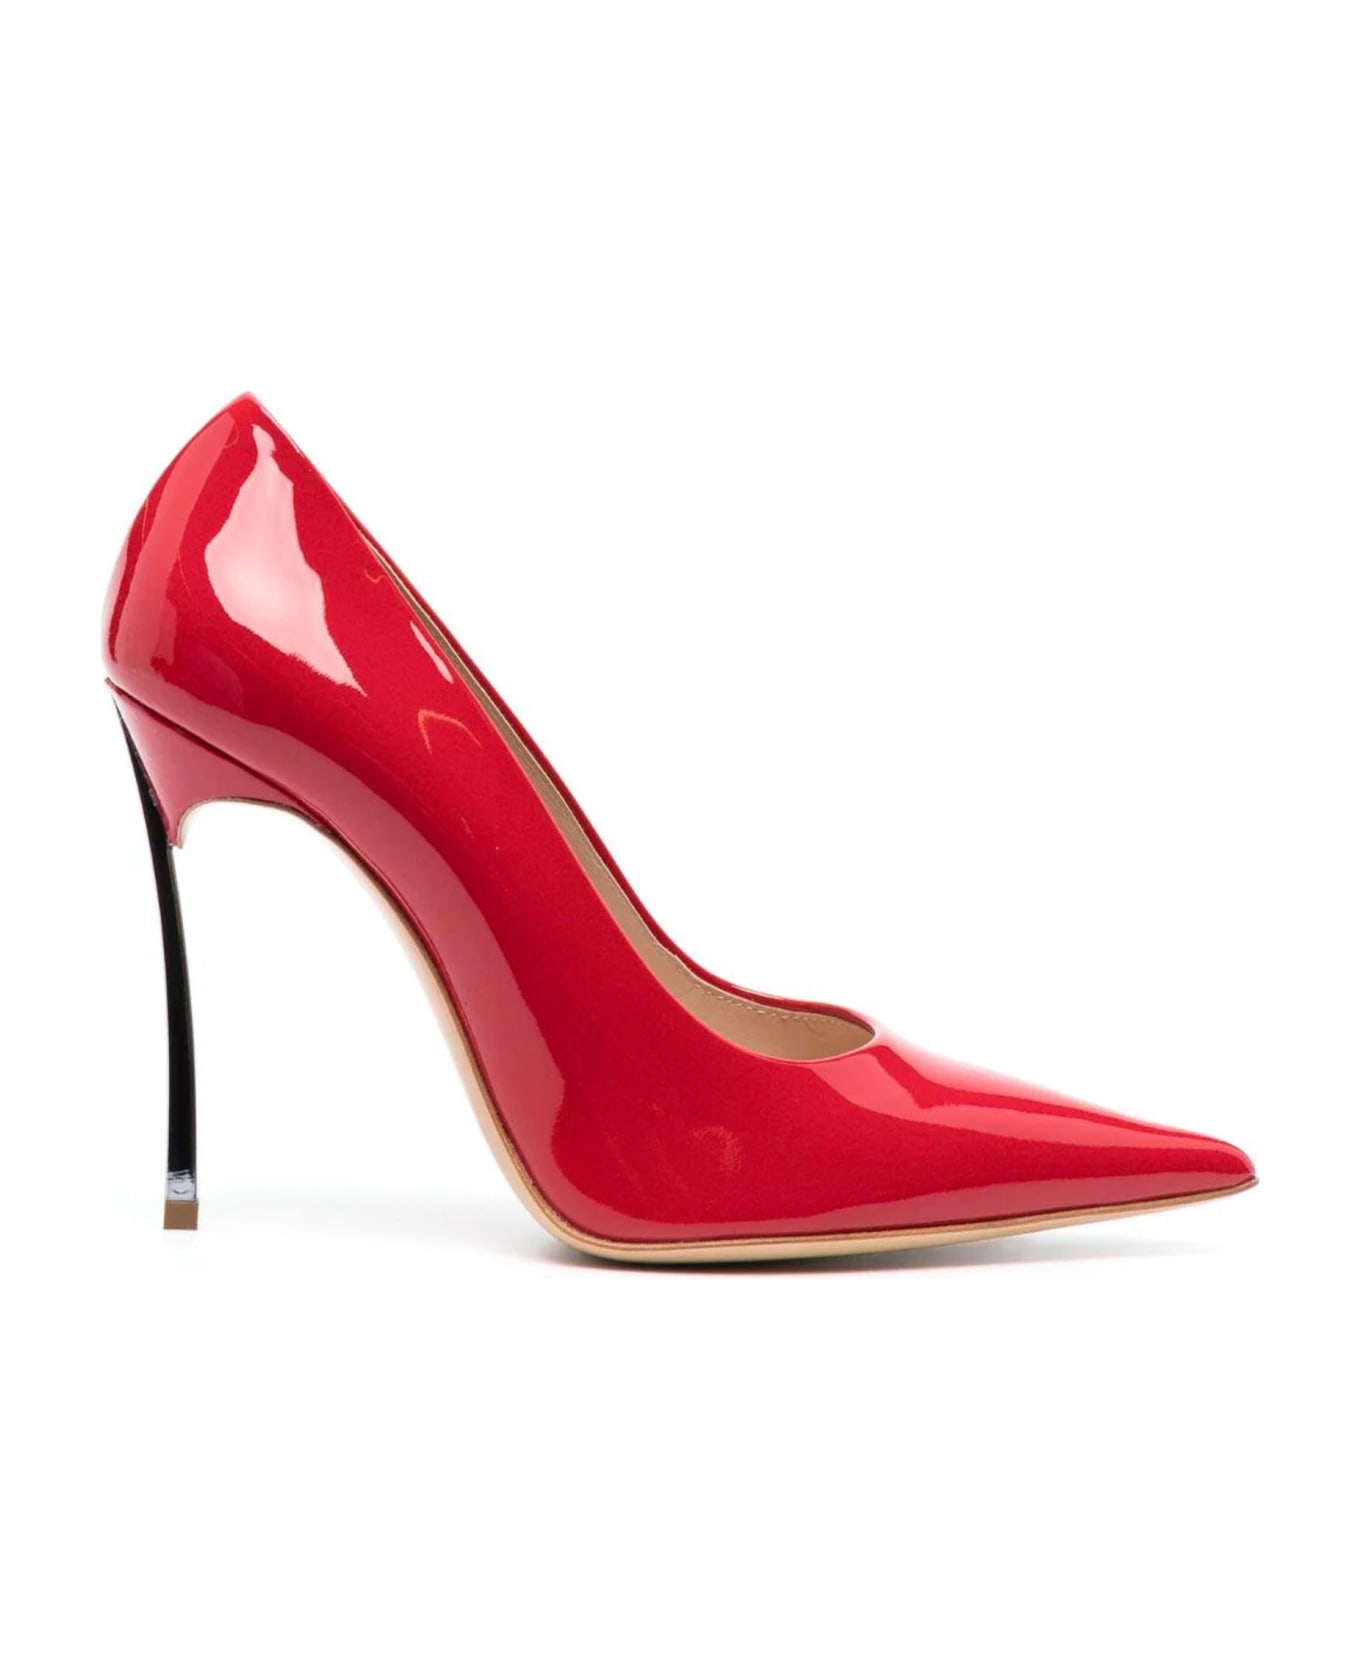 Casadei Bright Red Calf Leather Pumps - Red